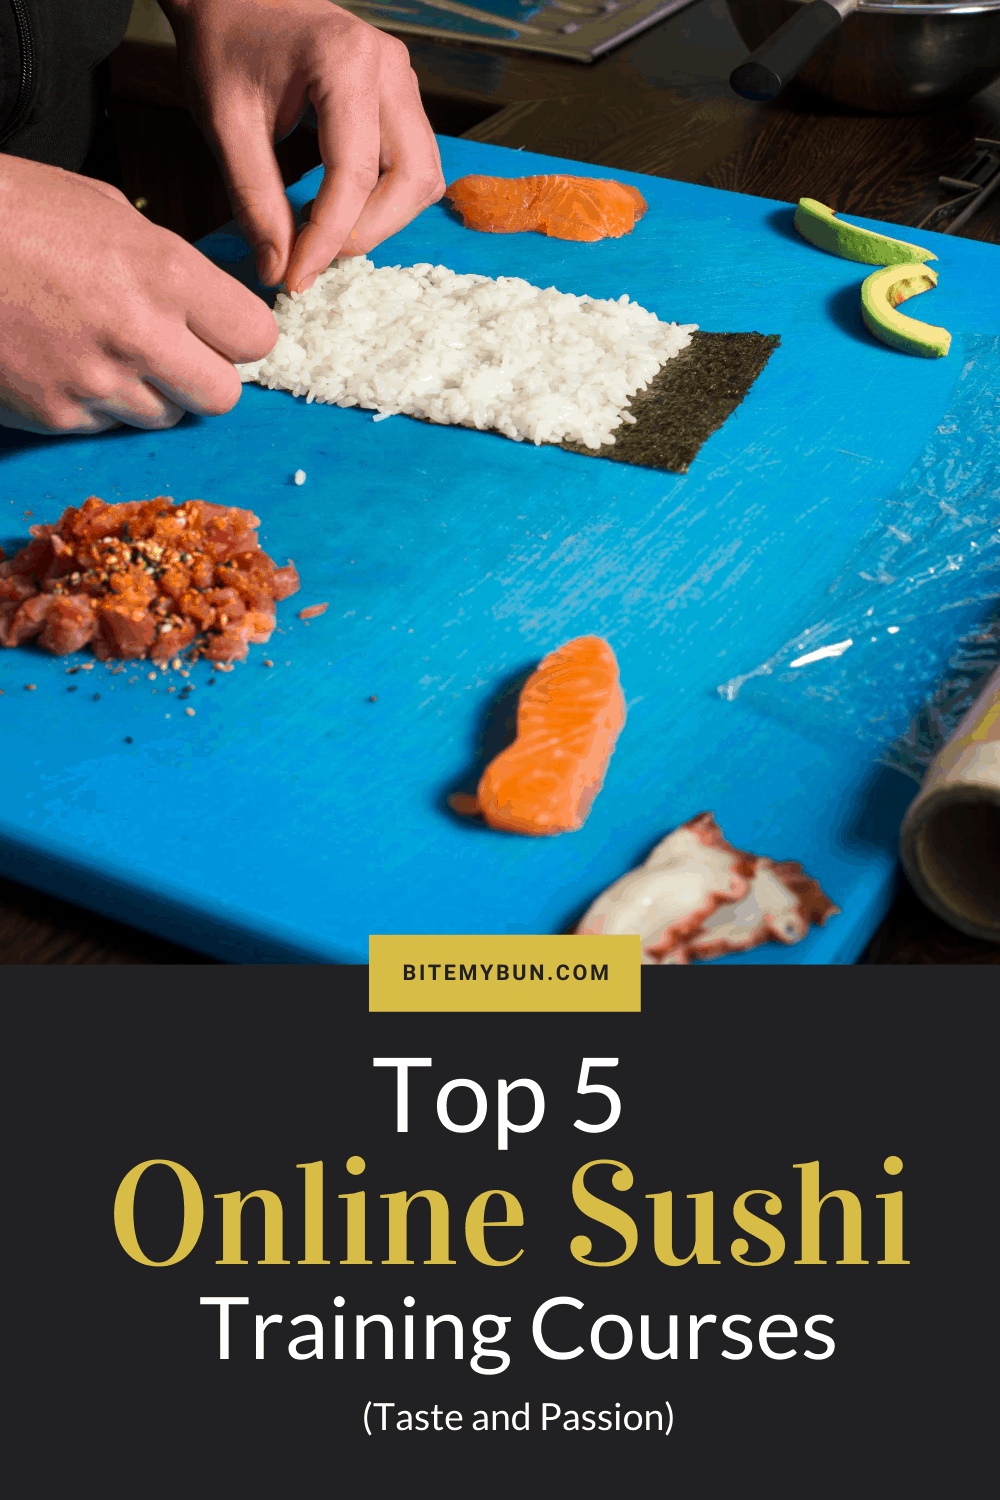 Online Sushi Courses